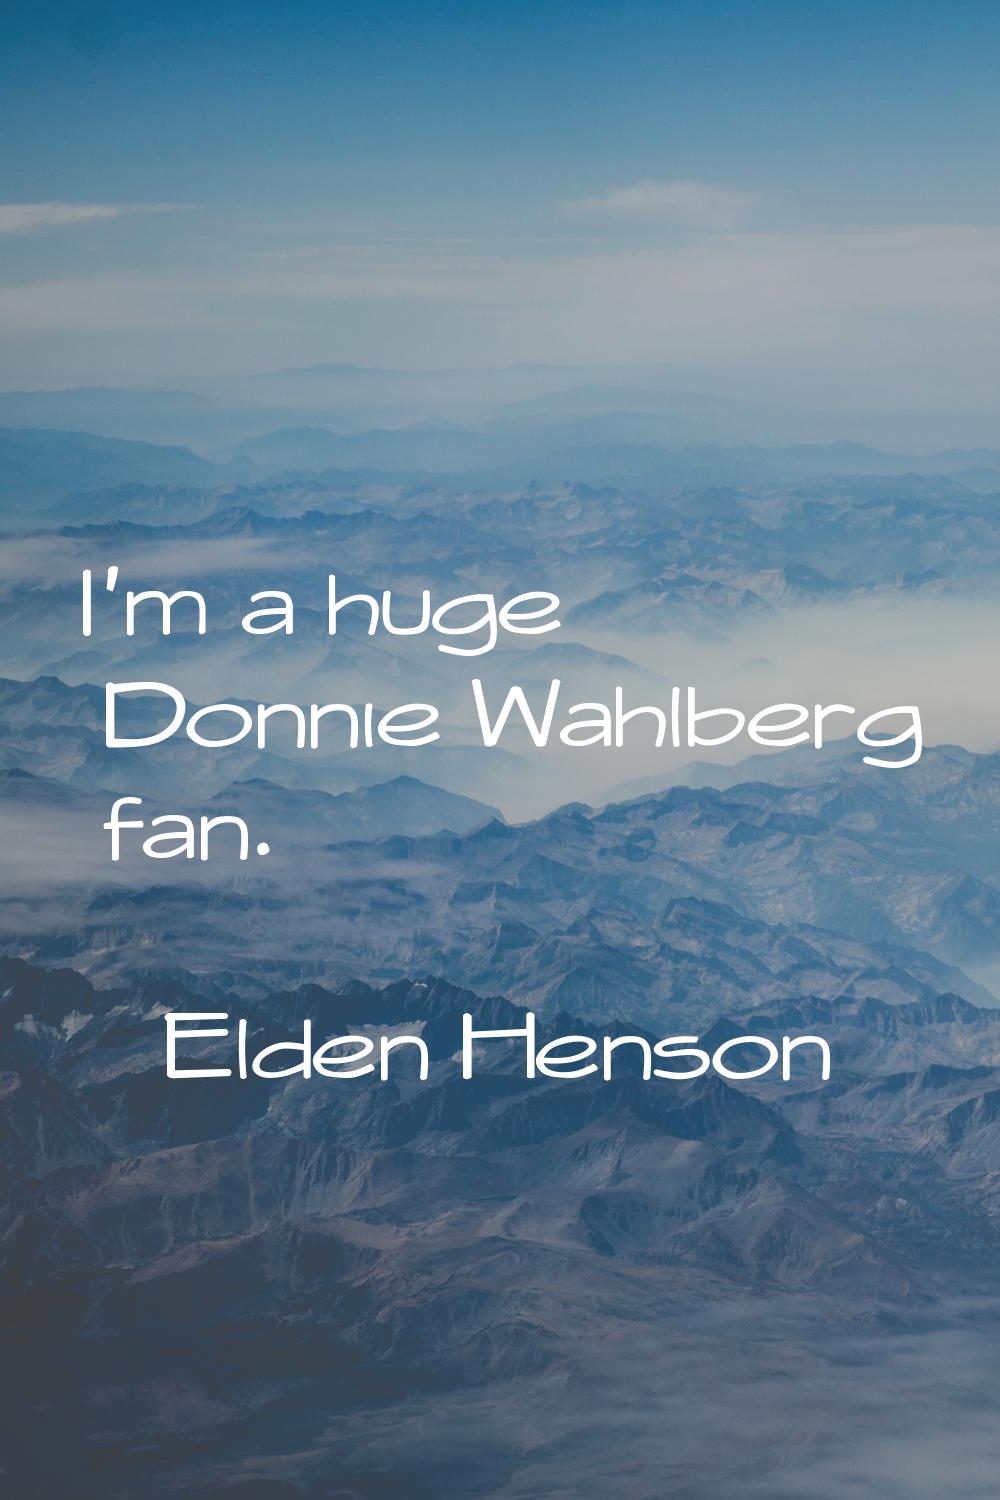 I'm a huge Donnie Wahlberg fan.